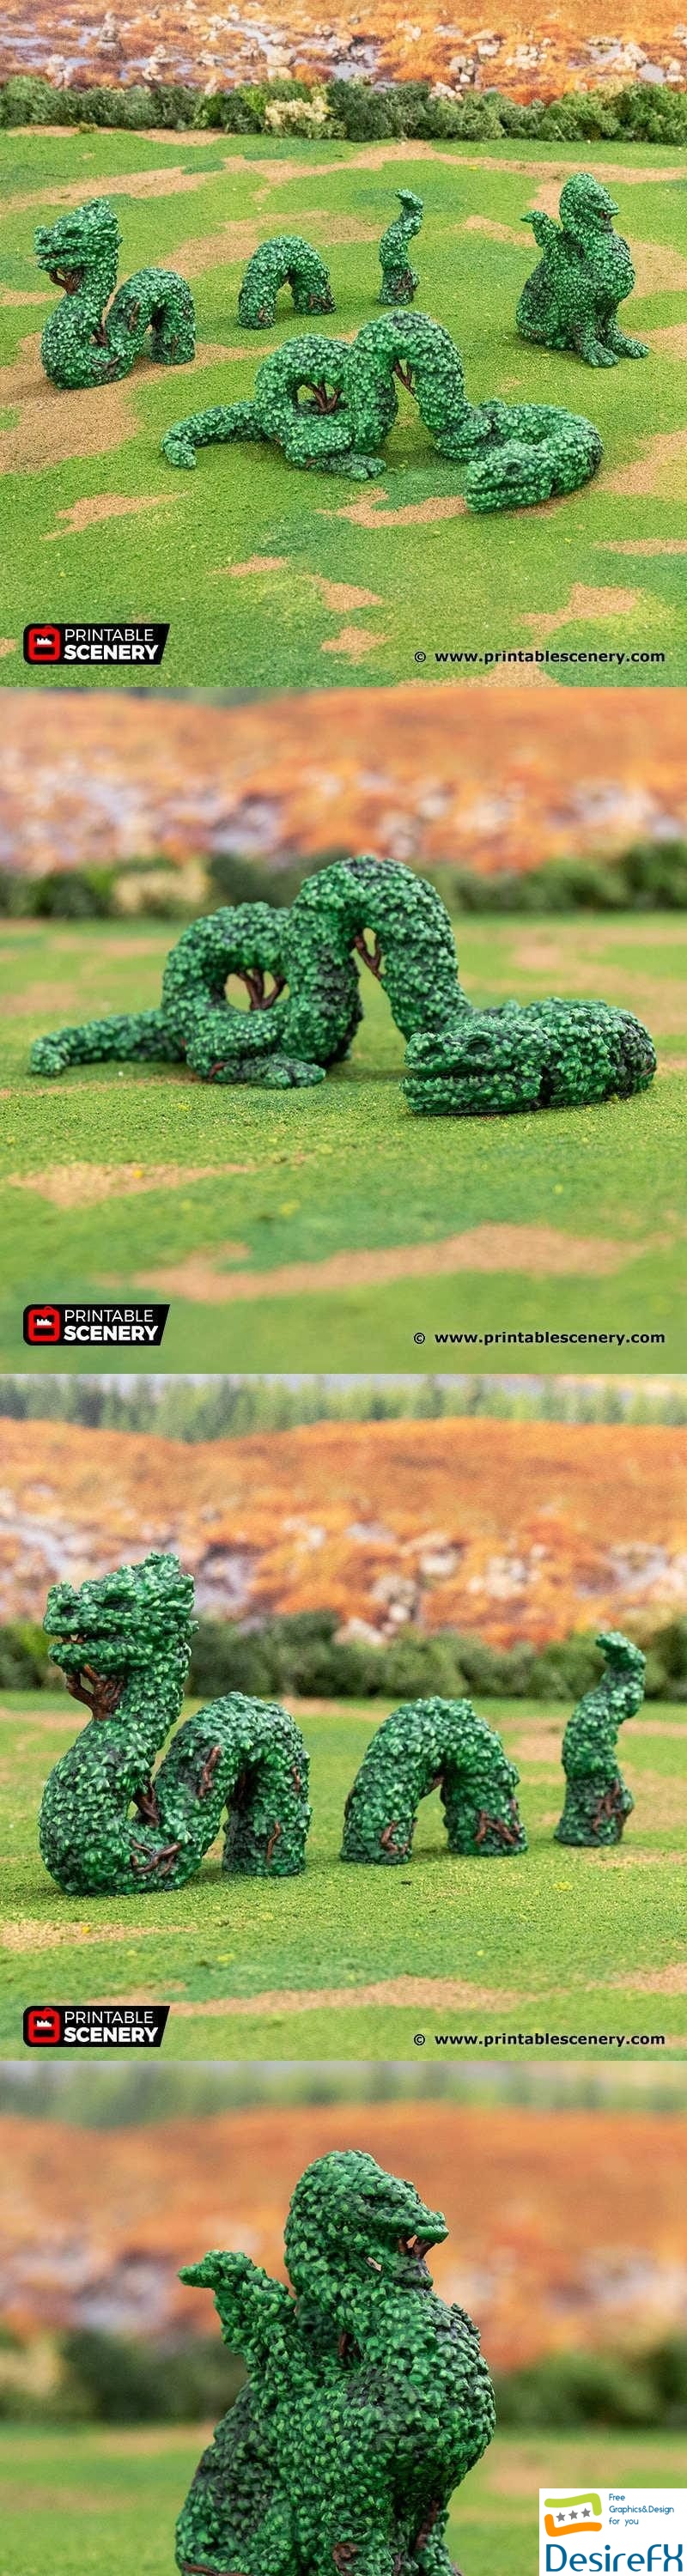 Printable Scenery - The Dragon Hedgerows - 3D Print